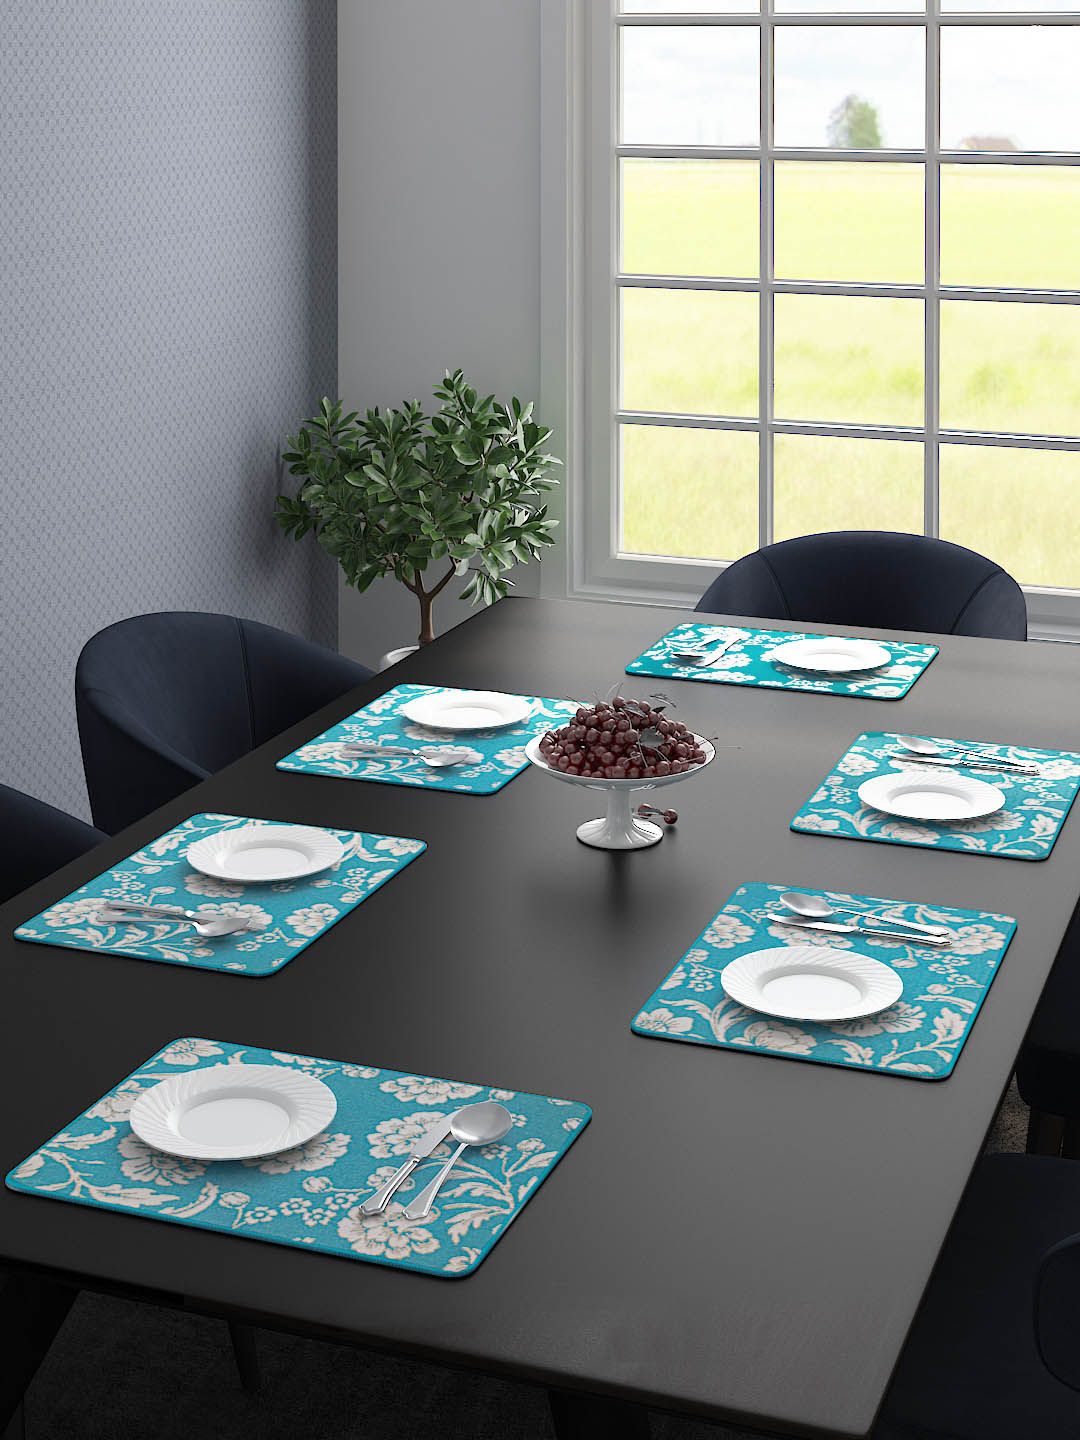 Saral Home Set of 6 Turquoise Blue Printed Table Placemats Price in India